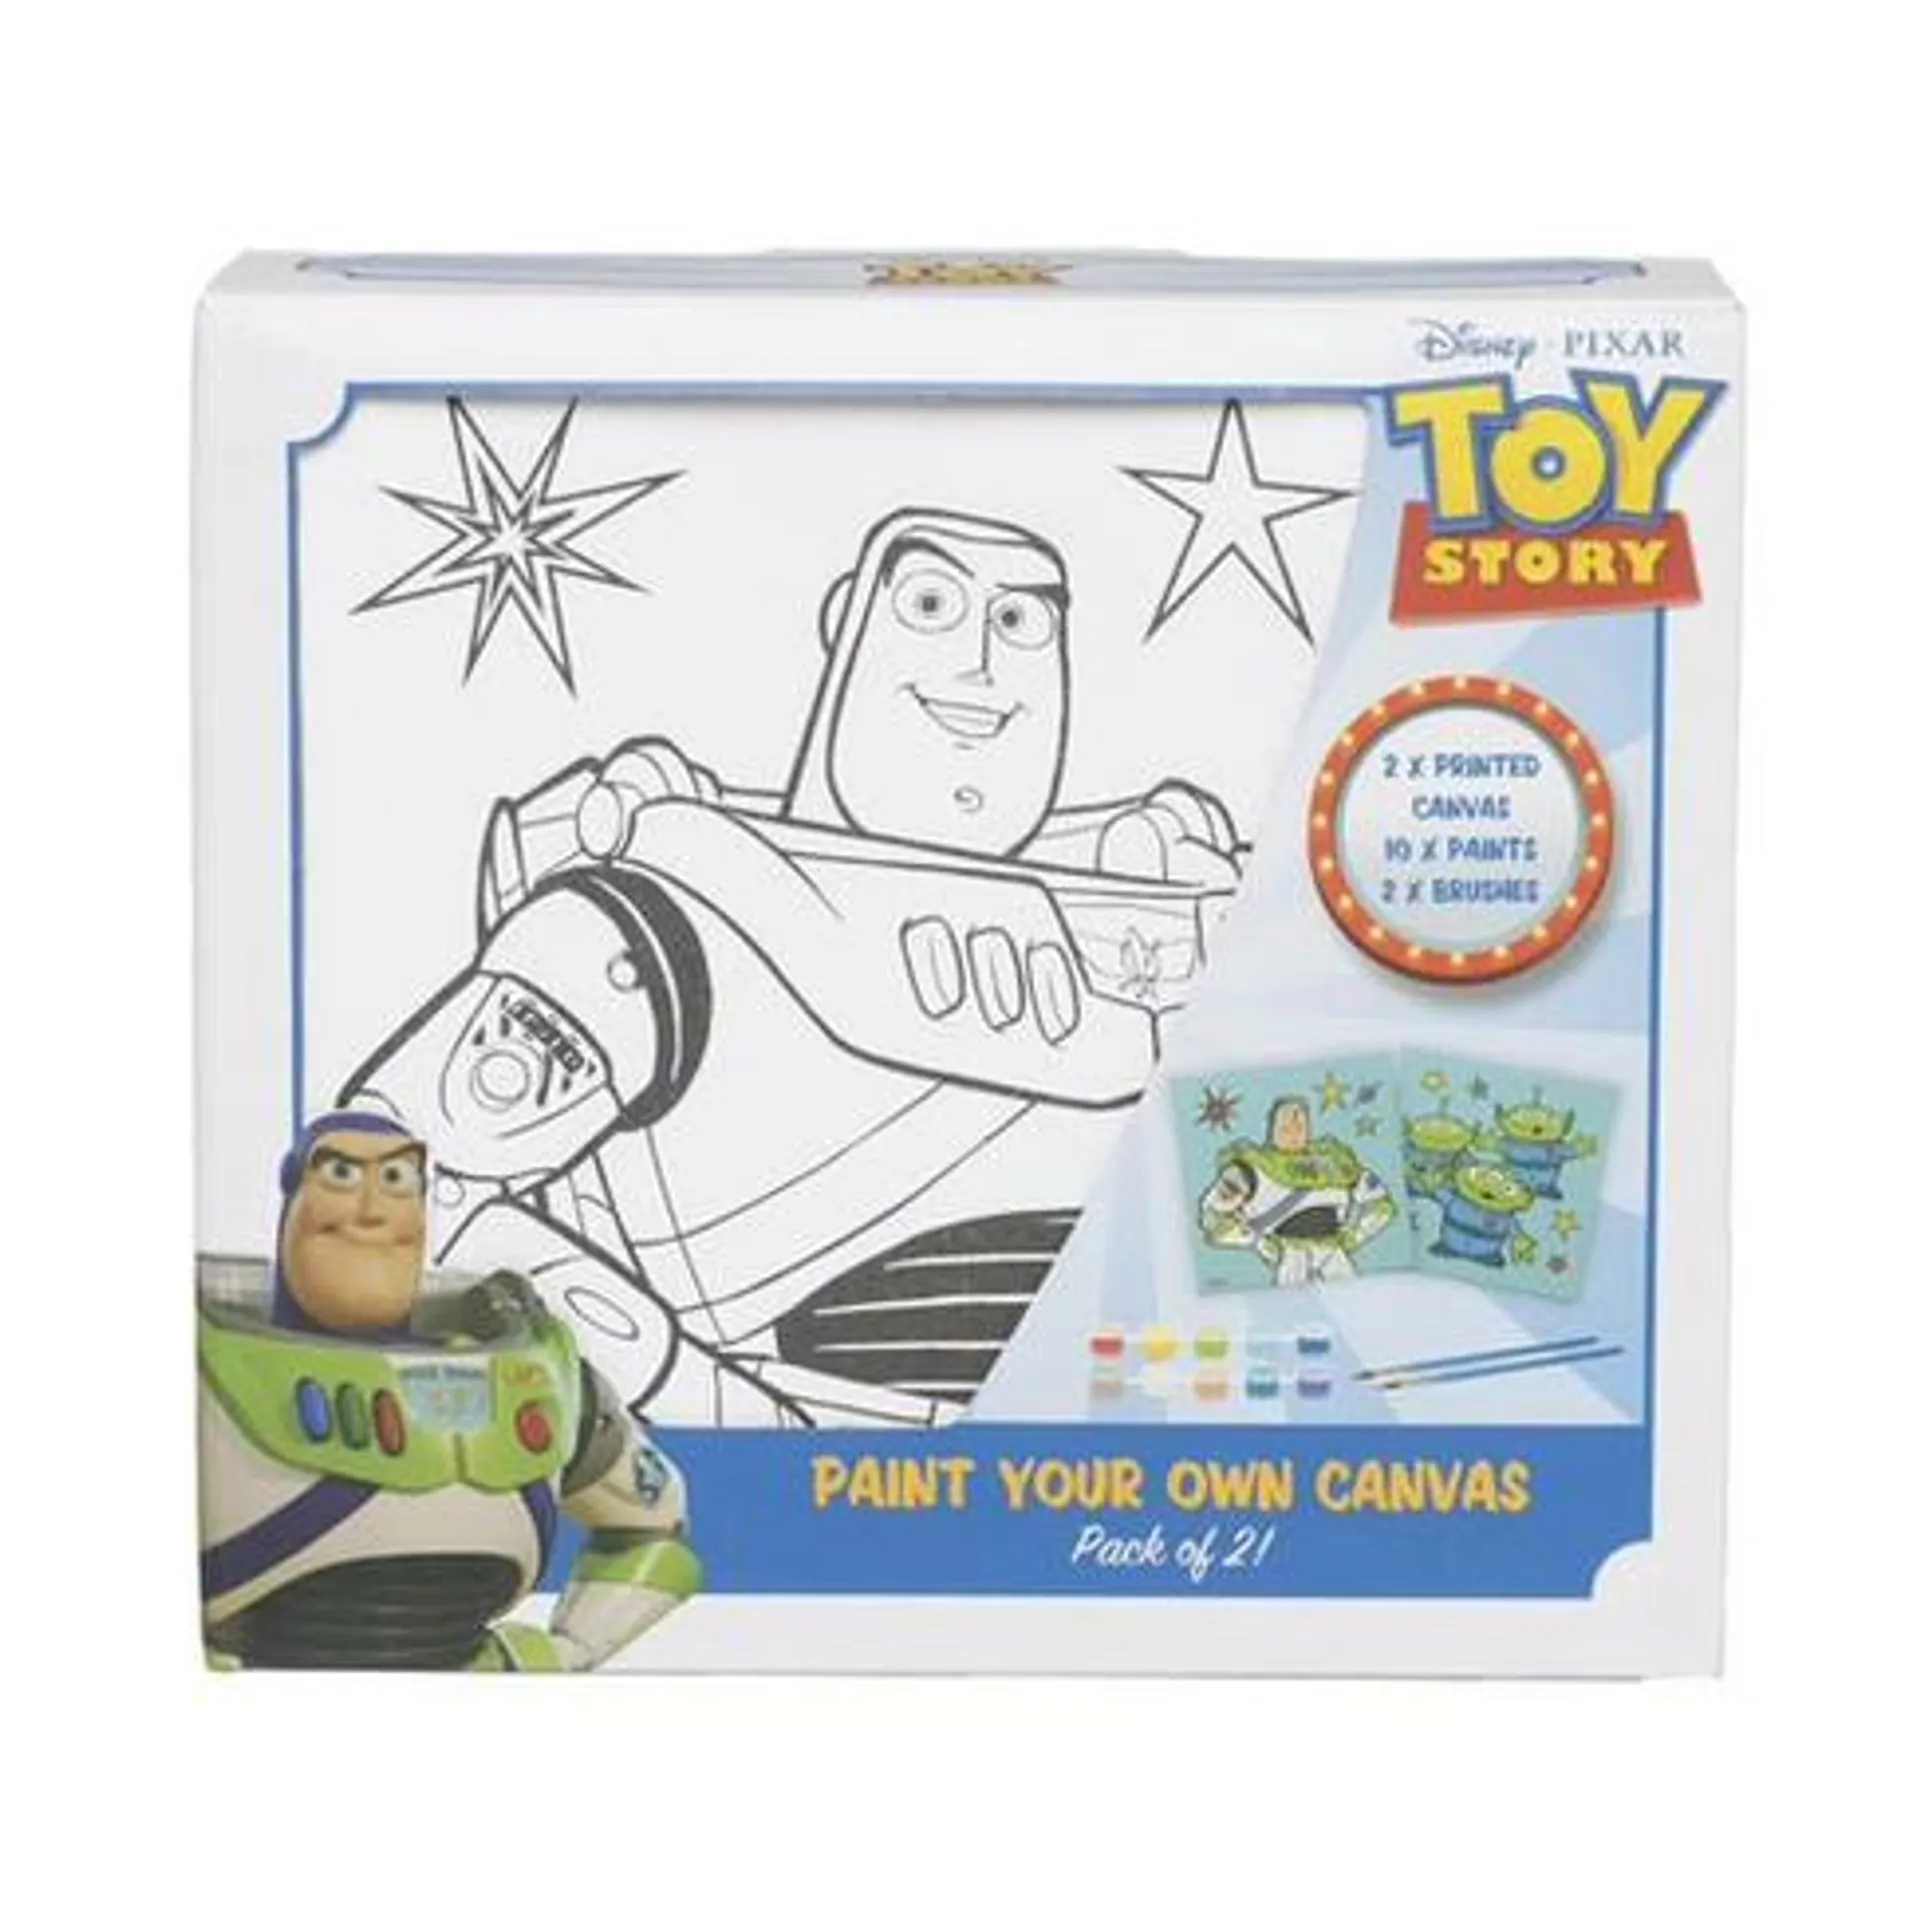 Toy Story Paint Your Own Canvas